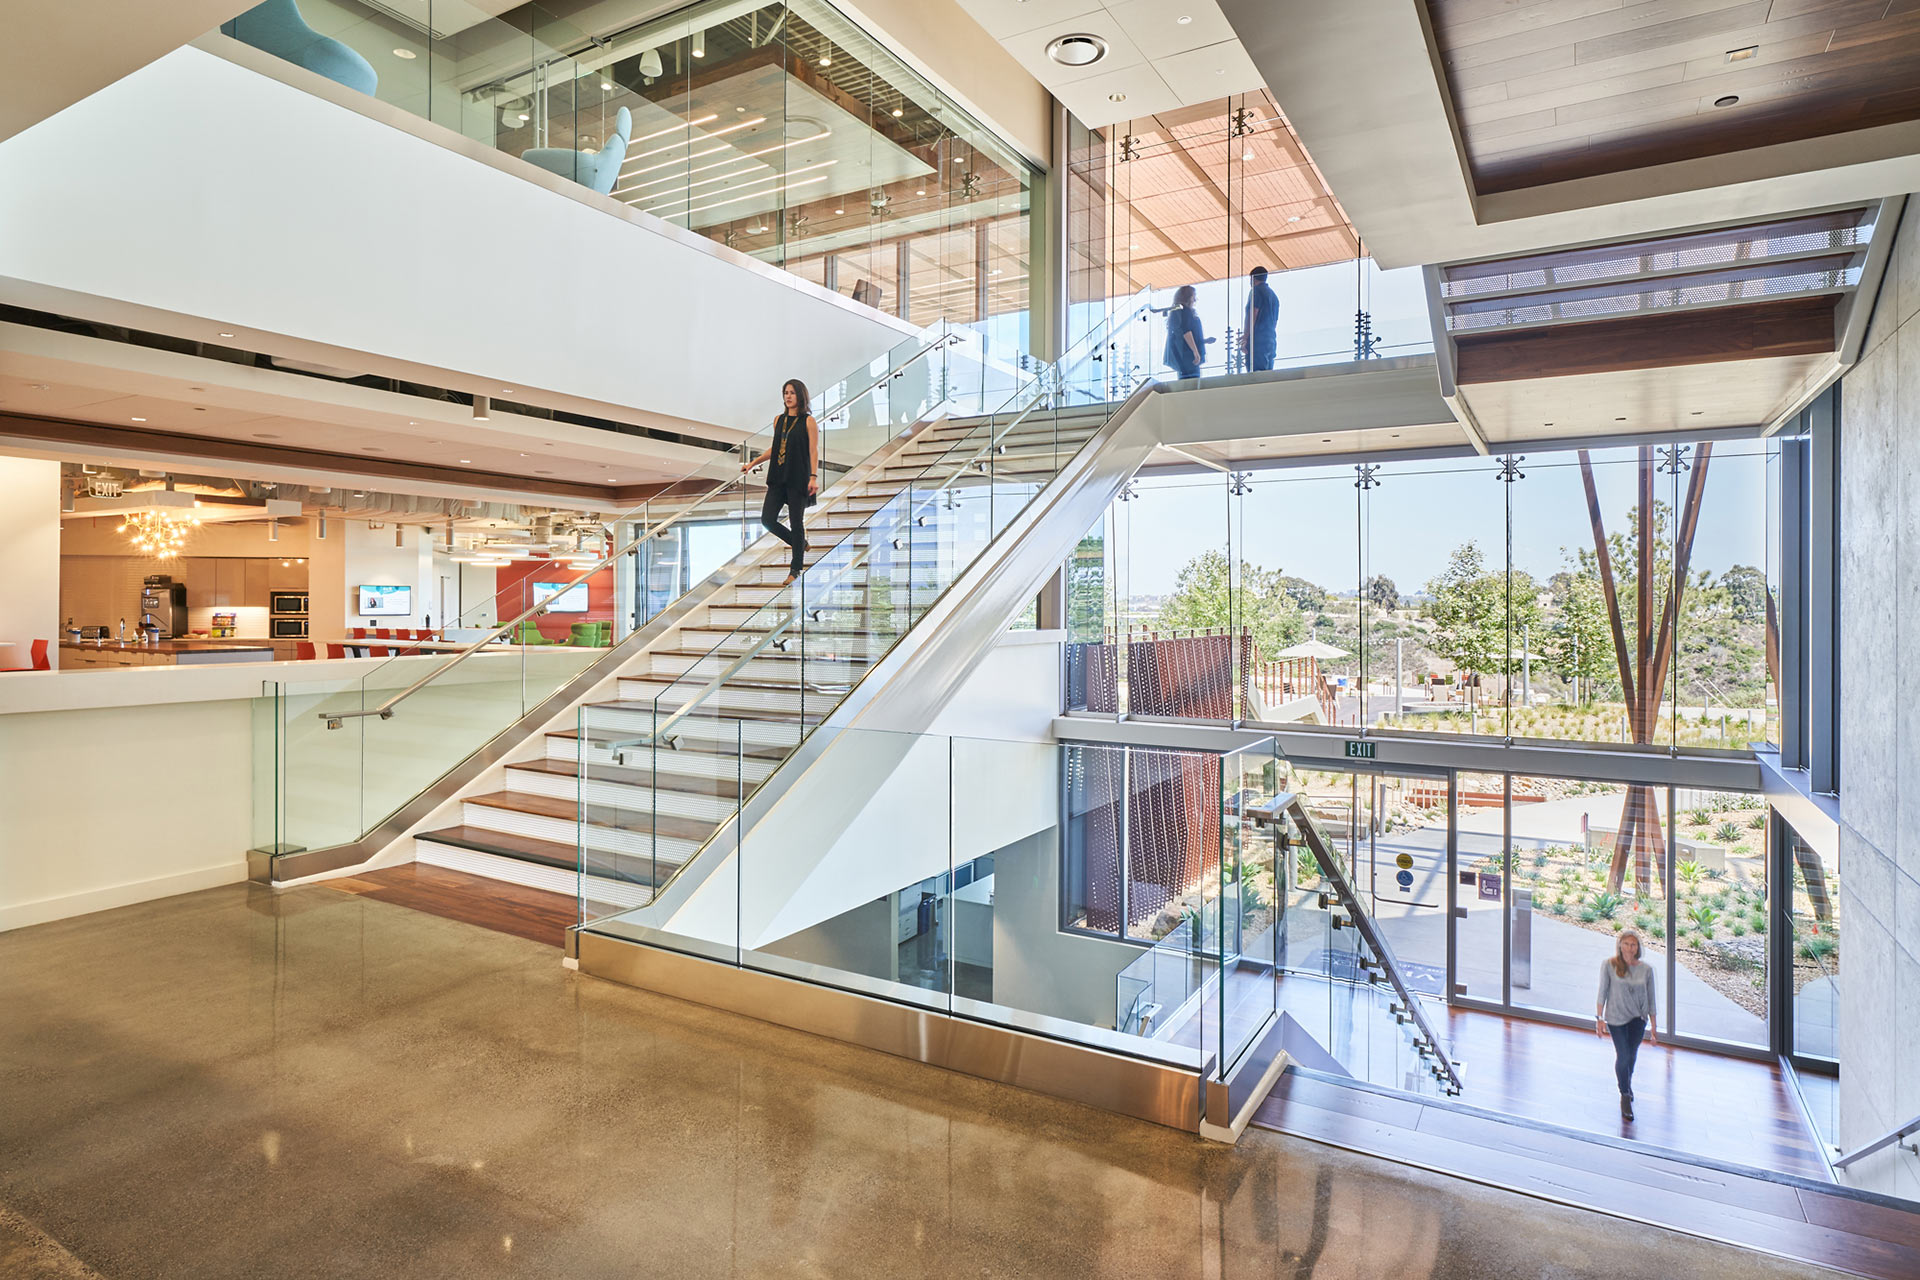 Interior at Vertex Pharmaceuticals life science facility, central stair with amenities nearby